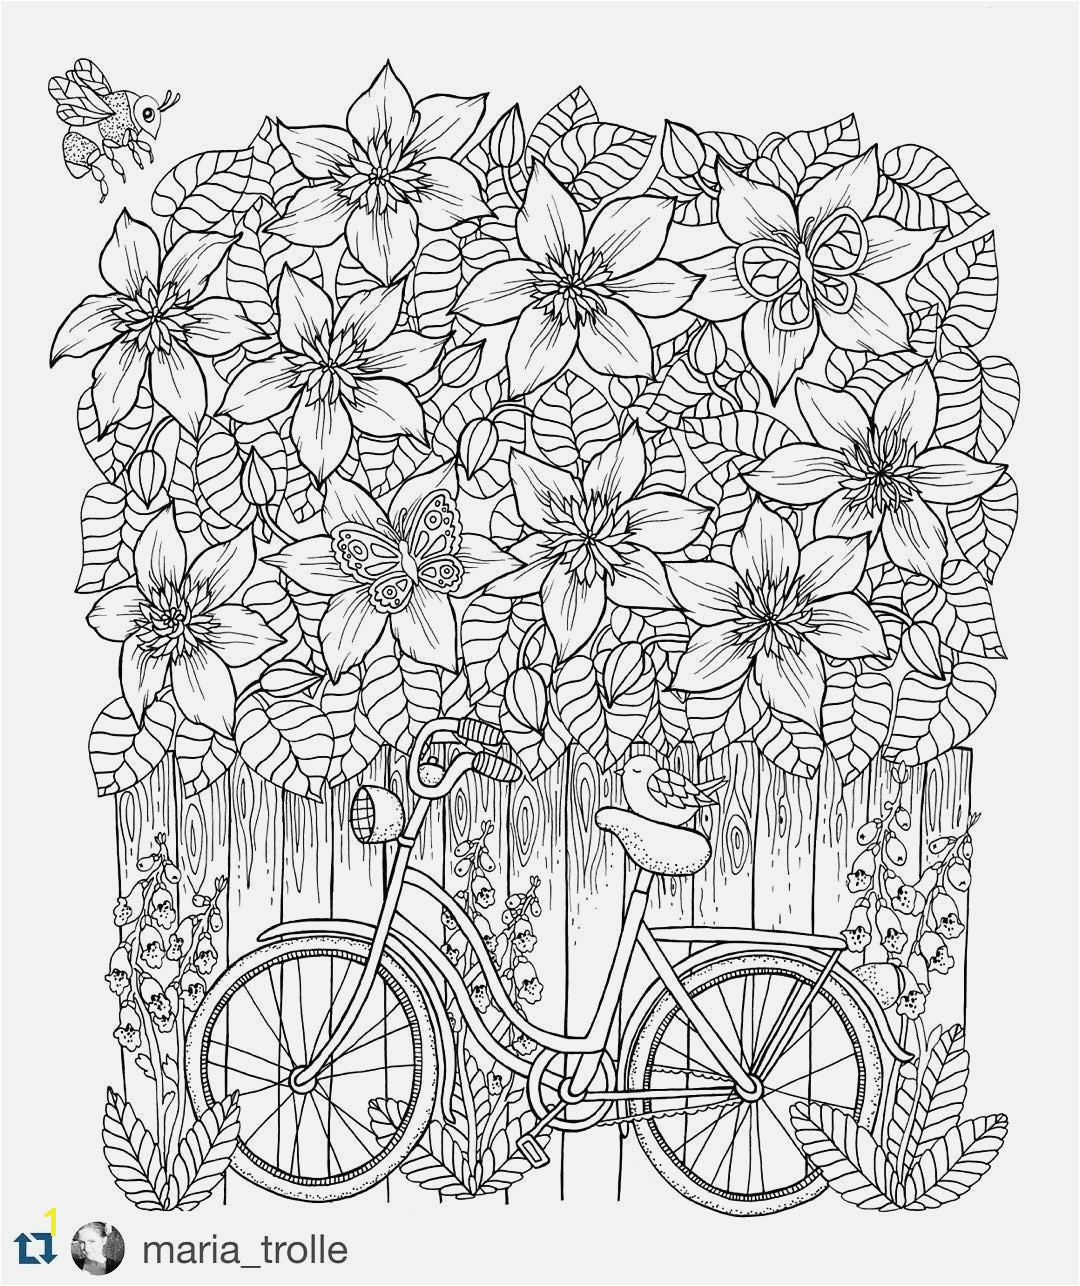 Easy Coloring Pages for Adults to Print Easy Adult Coloring Pages Printable Simple Adult Coloring Pages Best